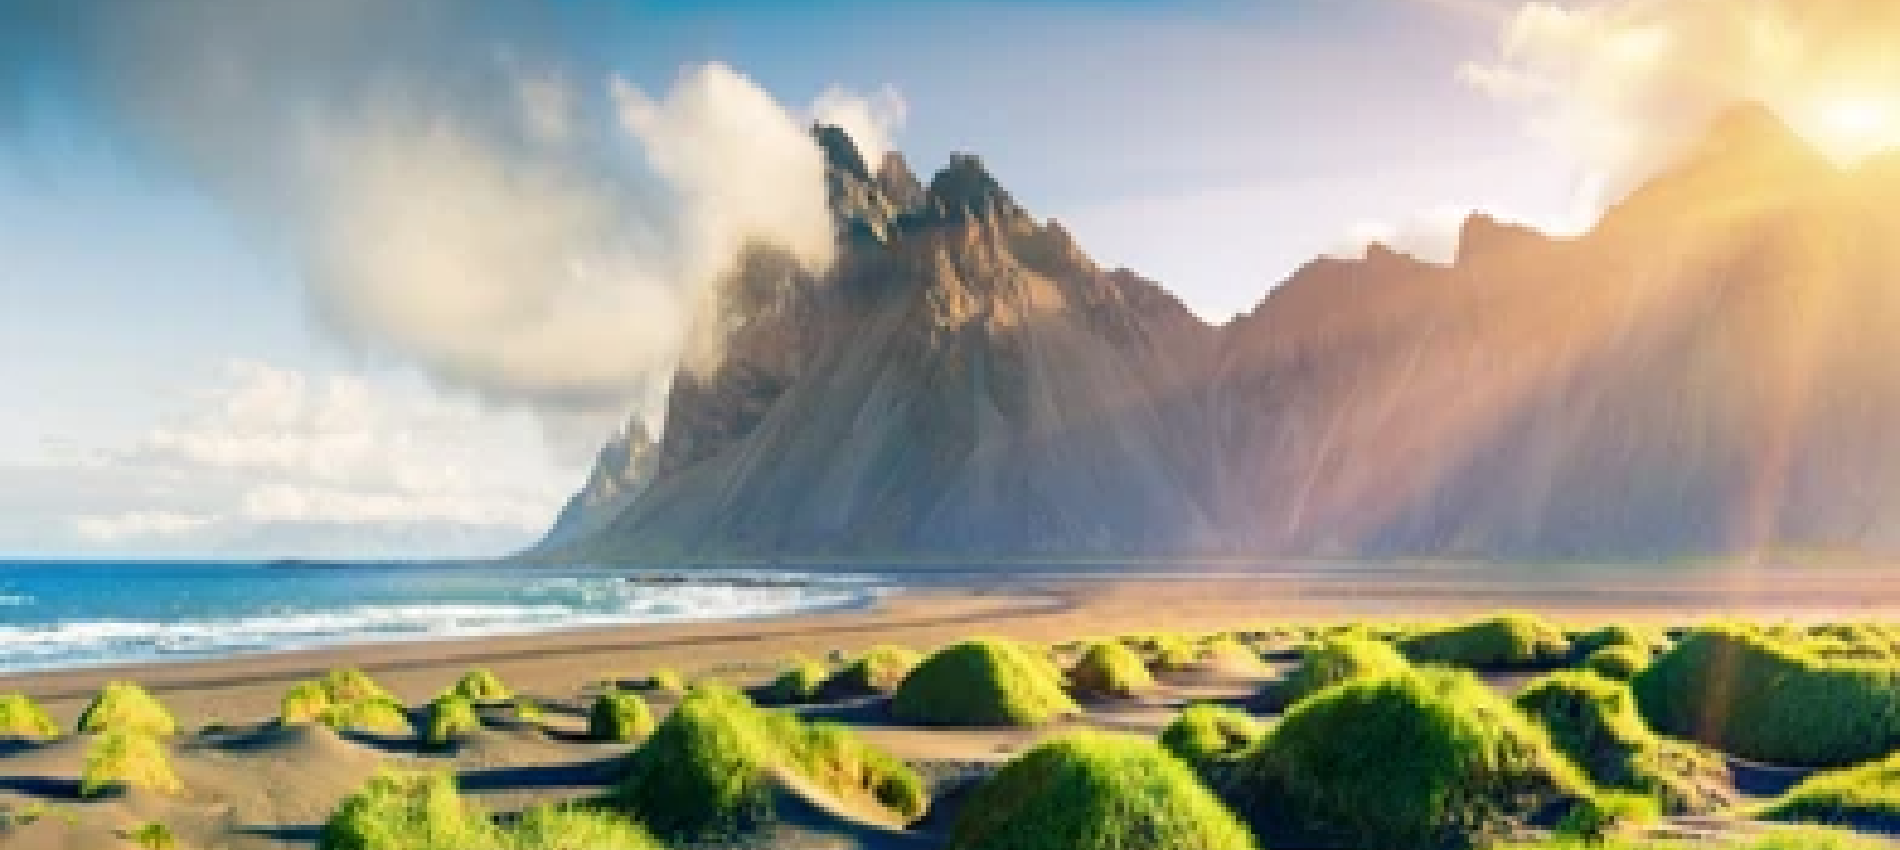 The green dunes of Stokksnes with Vestrahorn mountain in the background